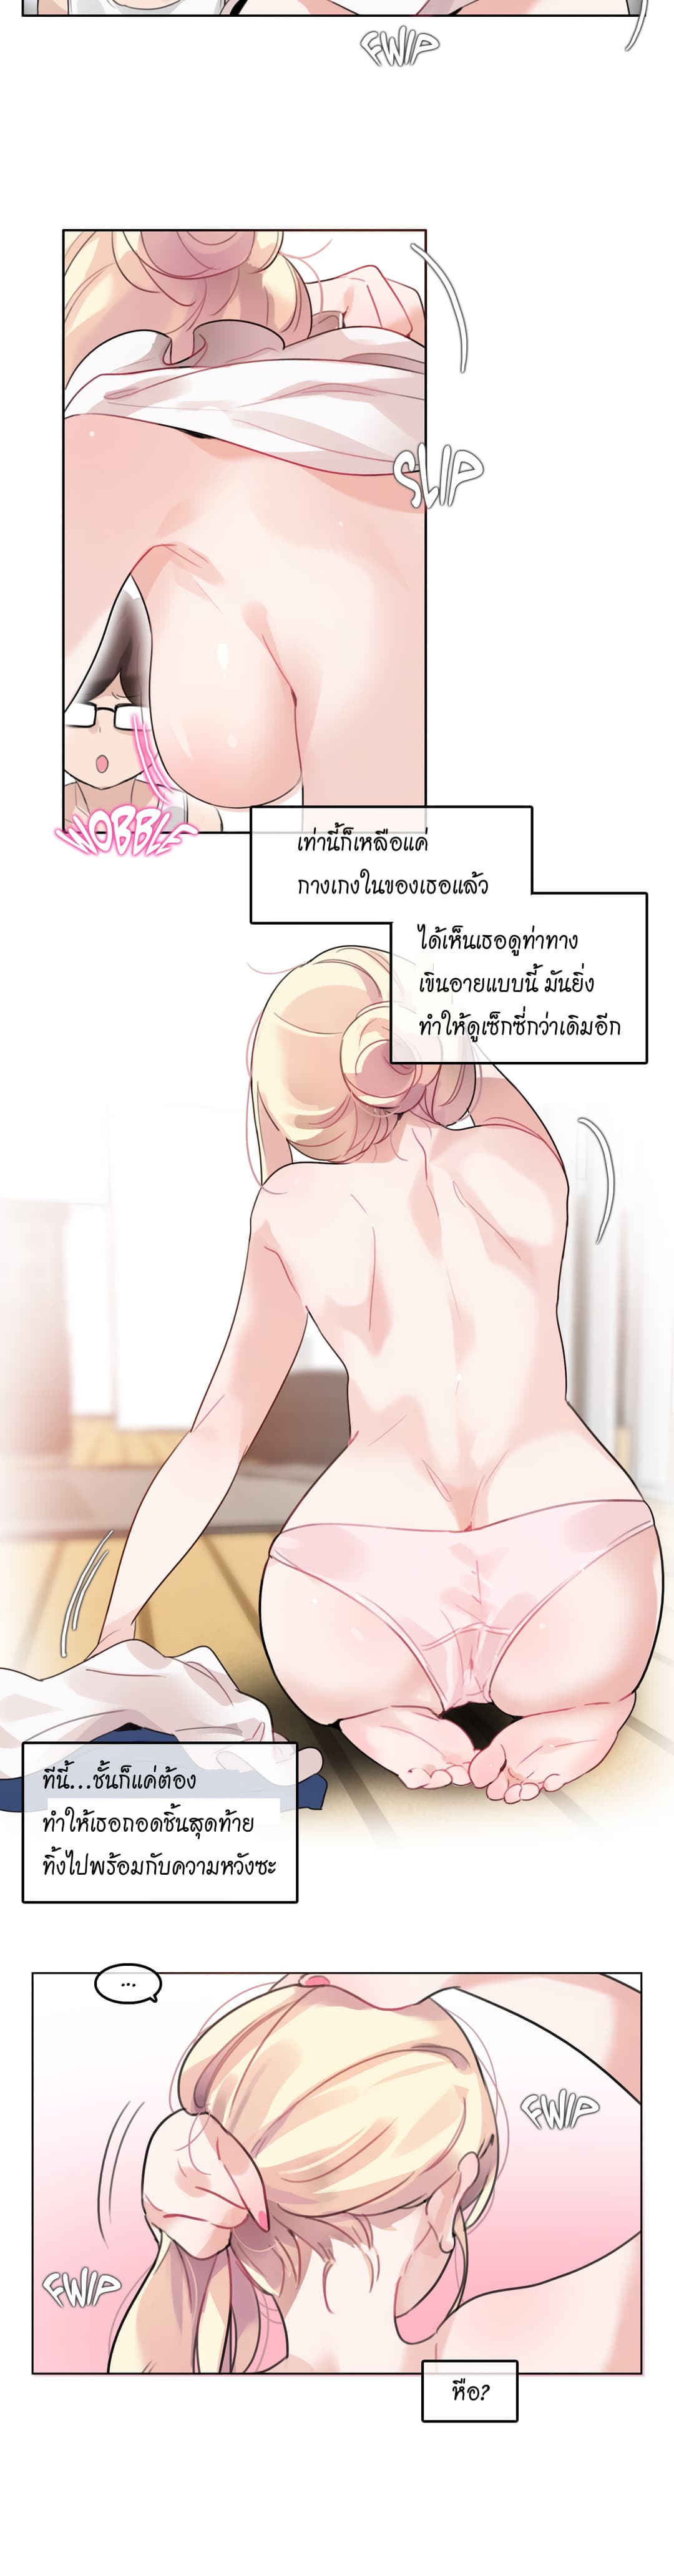 A Pervert’s Daily Life 34 (12)